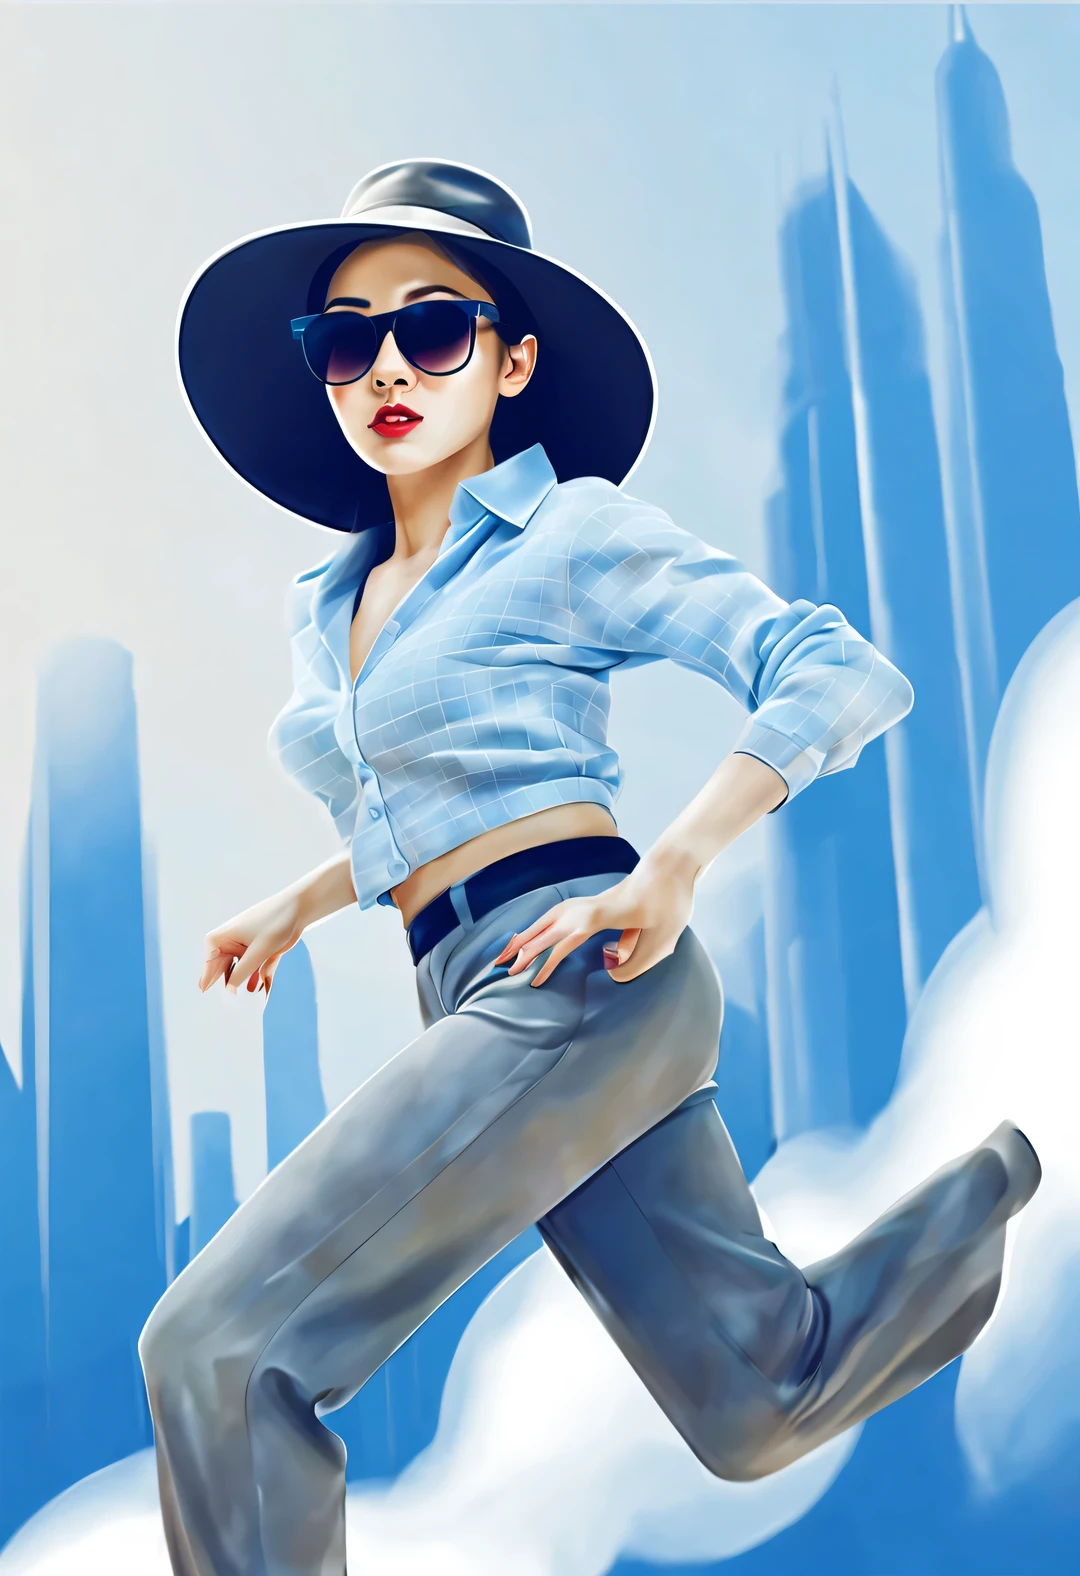 (Modern art dance simple poster design), (Half-length close-up), (Beautiful Chinese girl dancing in the air), (Wearing sunglasses and a hat: 1.2), Characterized by exquisite details and layering, The pastel tones of a light blue coat and off-white floral sweater blend together, And the sharp contrast of black and white plaid pants, Create an elegant and modern urban style. (Briefcase flight: 0.85), Wear modern and stylish winter fashion, Girl fair and flawless smooth skin, high nose bridge, Head up posture, sad yet beautiful, slender figure, Exquisite facial features,
swirling fog illustration, ink painting, black hair, Princess curly long hair, Proud, Surrealism, contemporary art photography, action painting illustration, abstract expressionism, Pixar, depth of field, motion blur, backlight, Fall out, decline, Elevation viewing angle, Sony FE General Manager, ultra high definition, masterpiece, Accuracy, textured skin, Super details, high detail, high quality, Award-winning, best quality, Level, 16k, Shot from a bottom-up perspective,